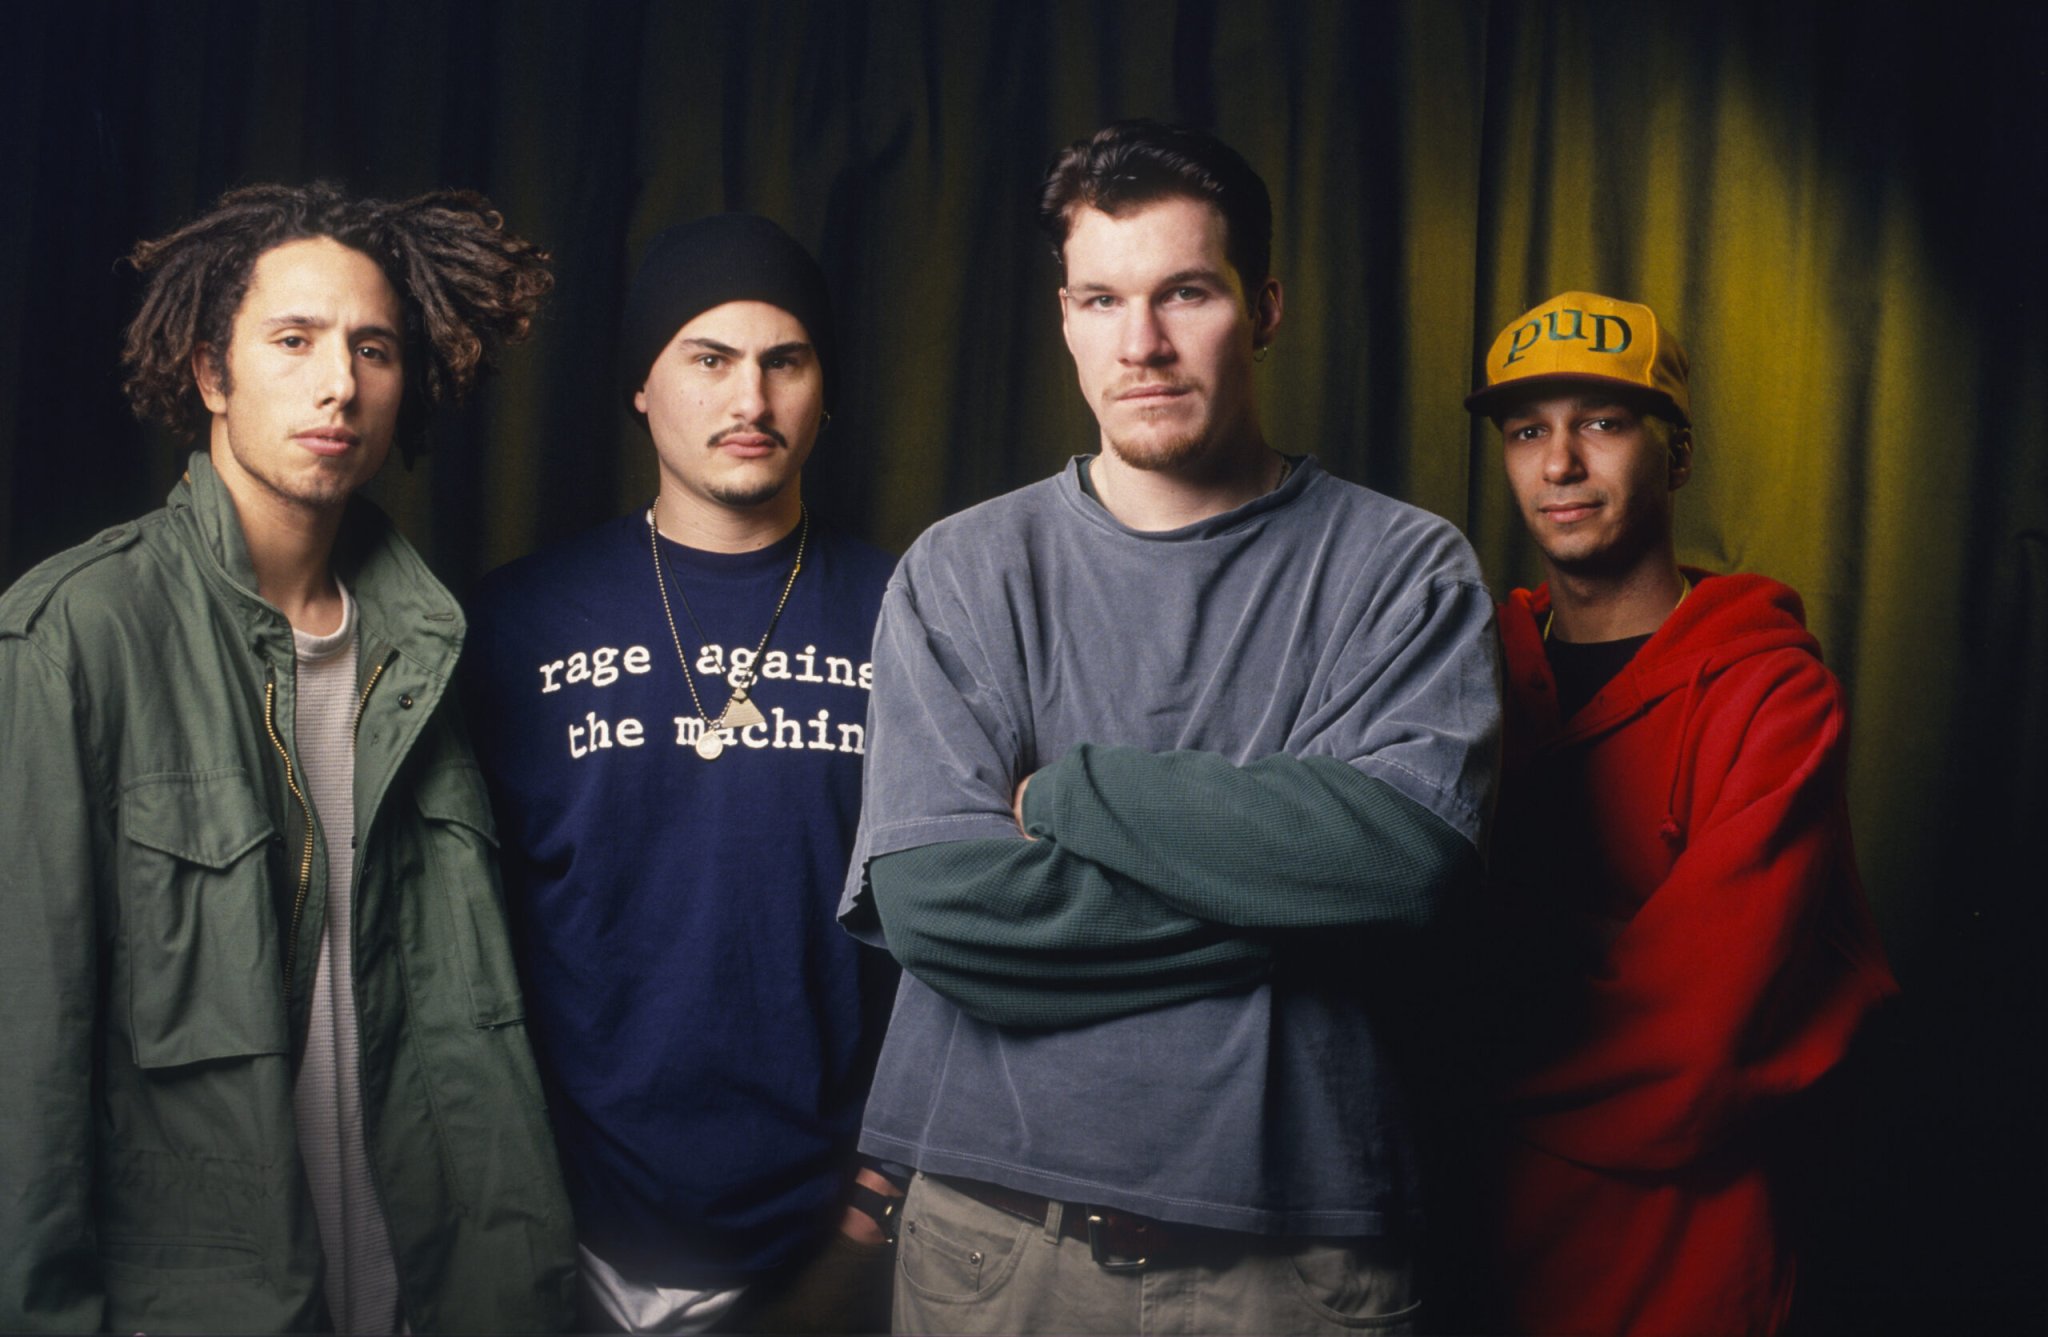 A Vancouver Radio Station Has Been Playing Rage Against the Machine's 'Killing in the Name' Nonstop